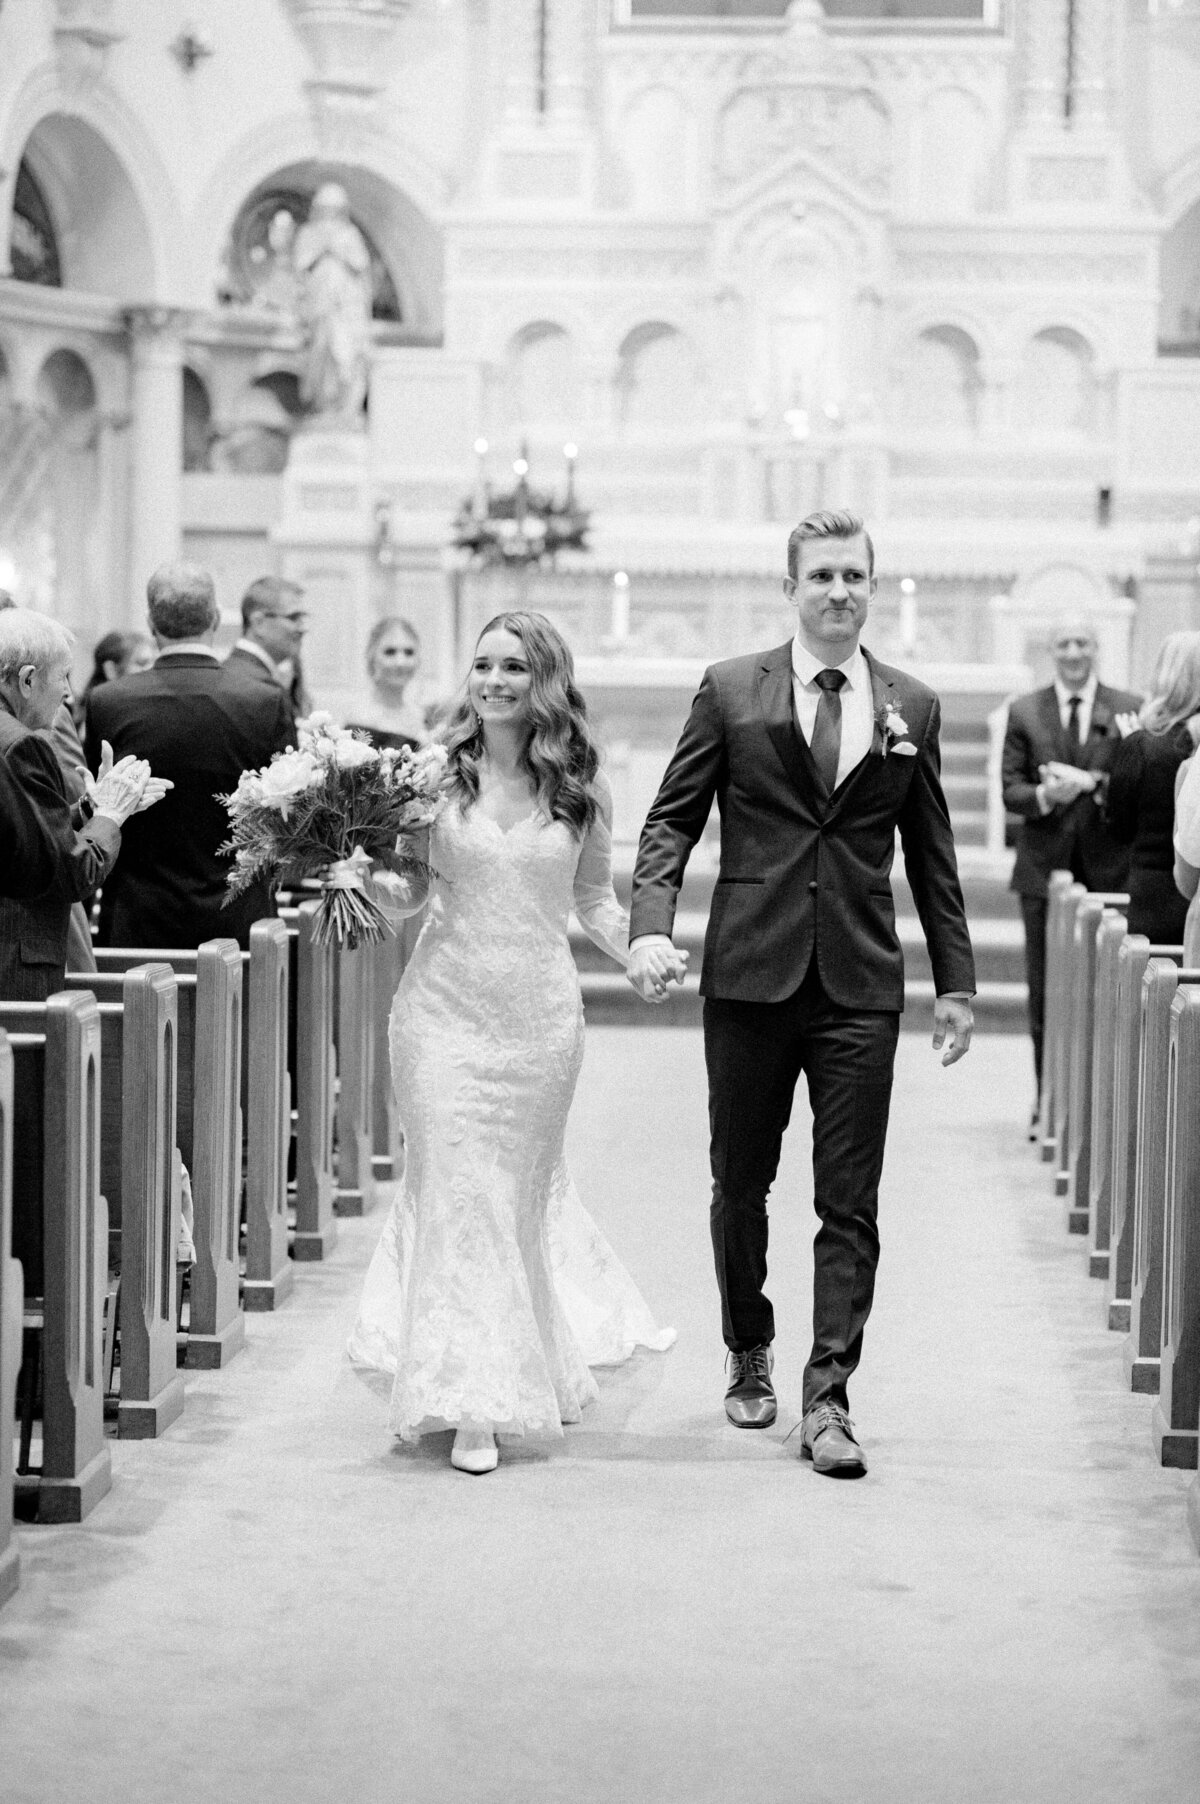 Mr and mrs walk down the aisle